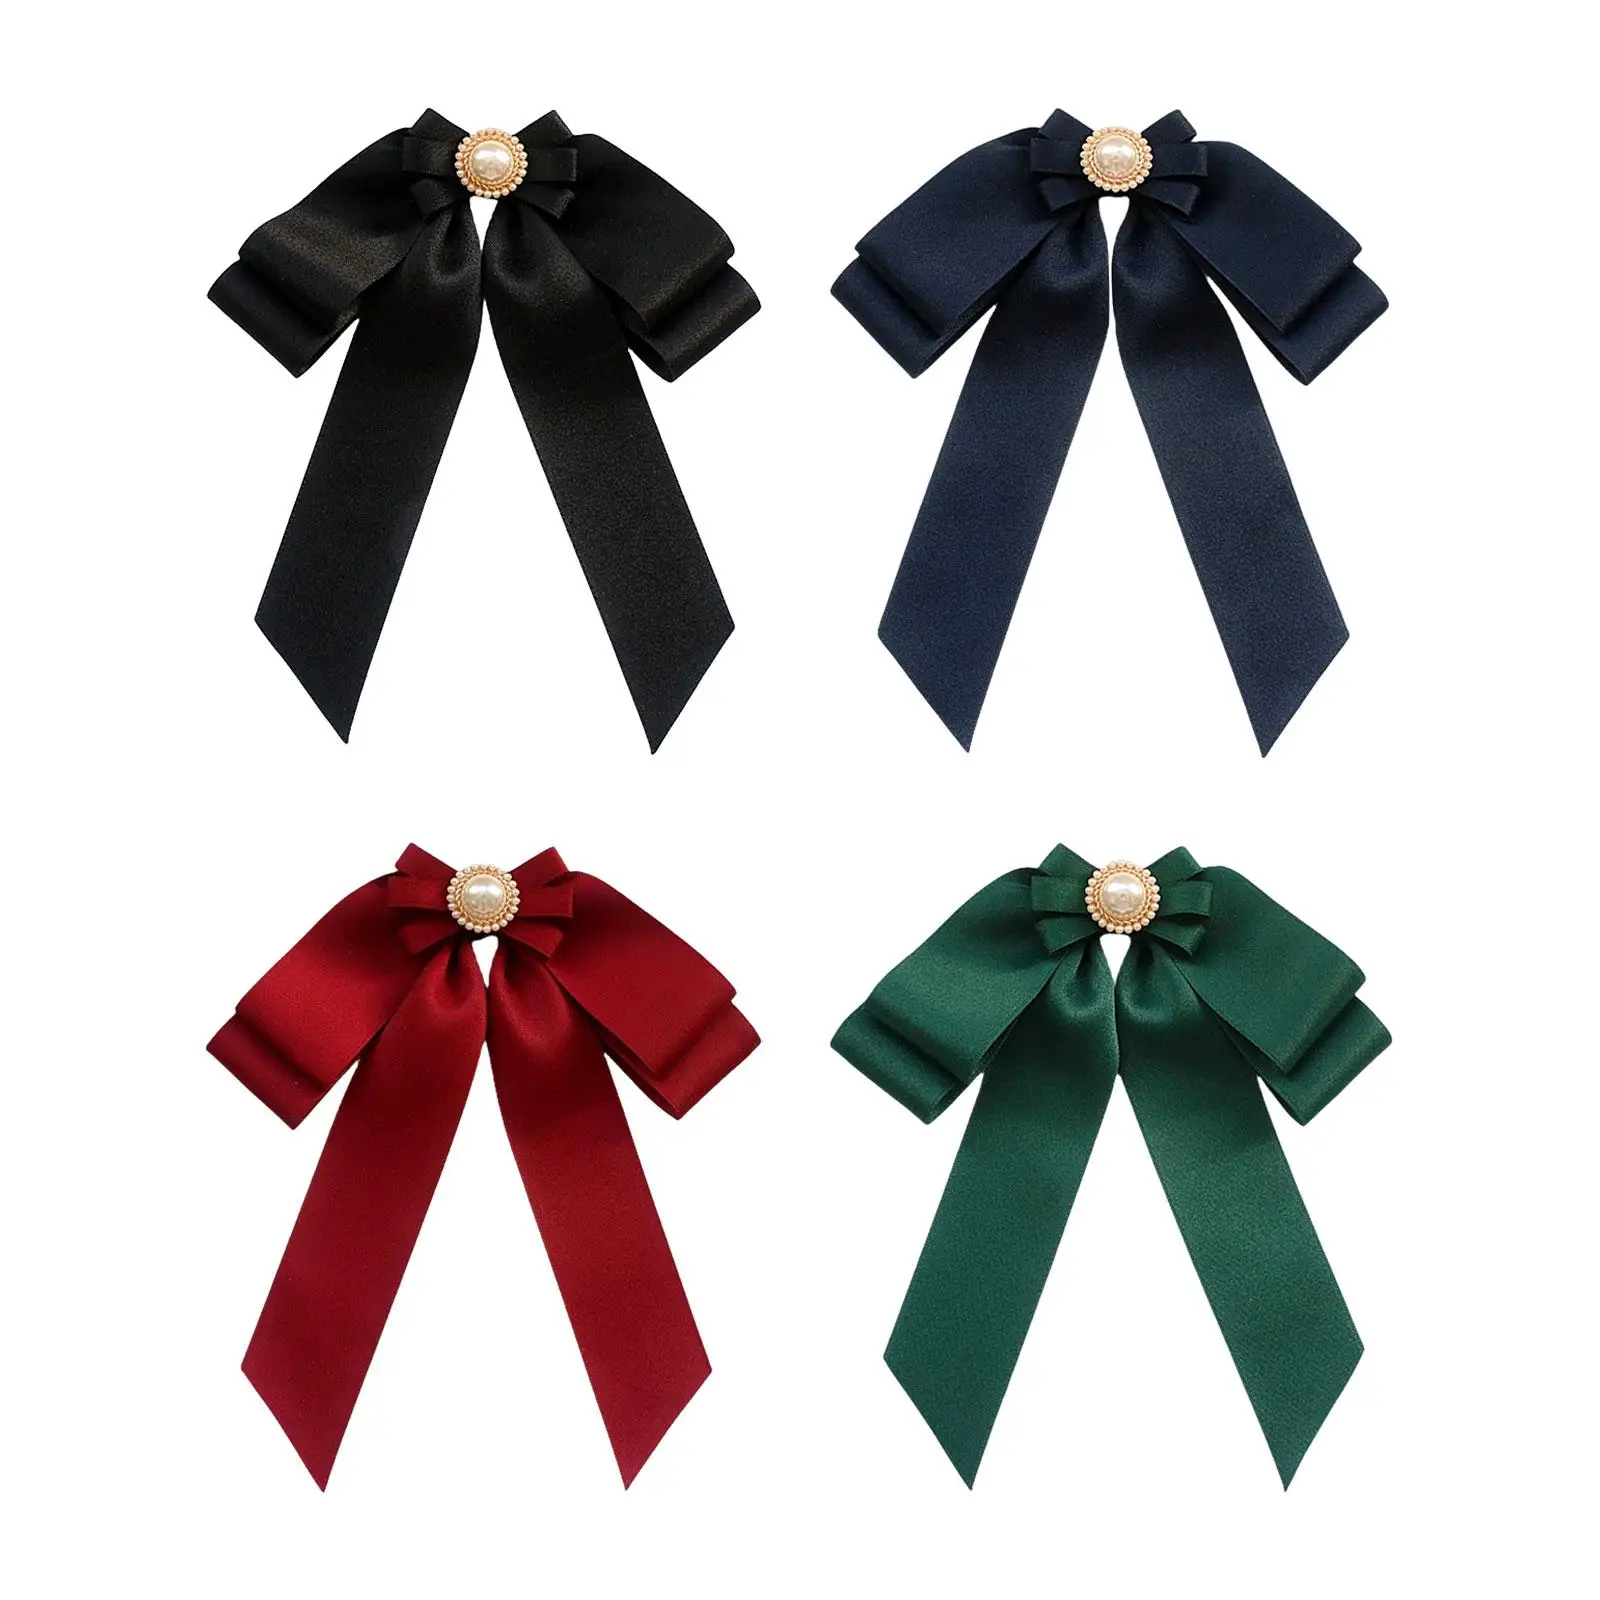 

Women's Pre Tied Bowknot Brooch Trendy Novelty Decoration Clothing Accessory Neckties Pin for Shirts Hat Blouse Coat Anniversary